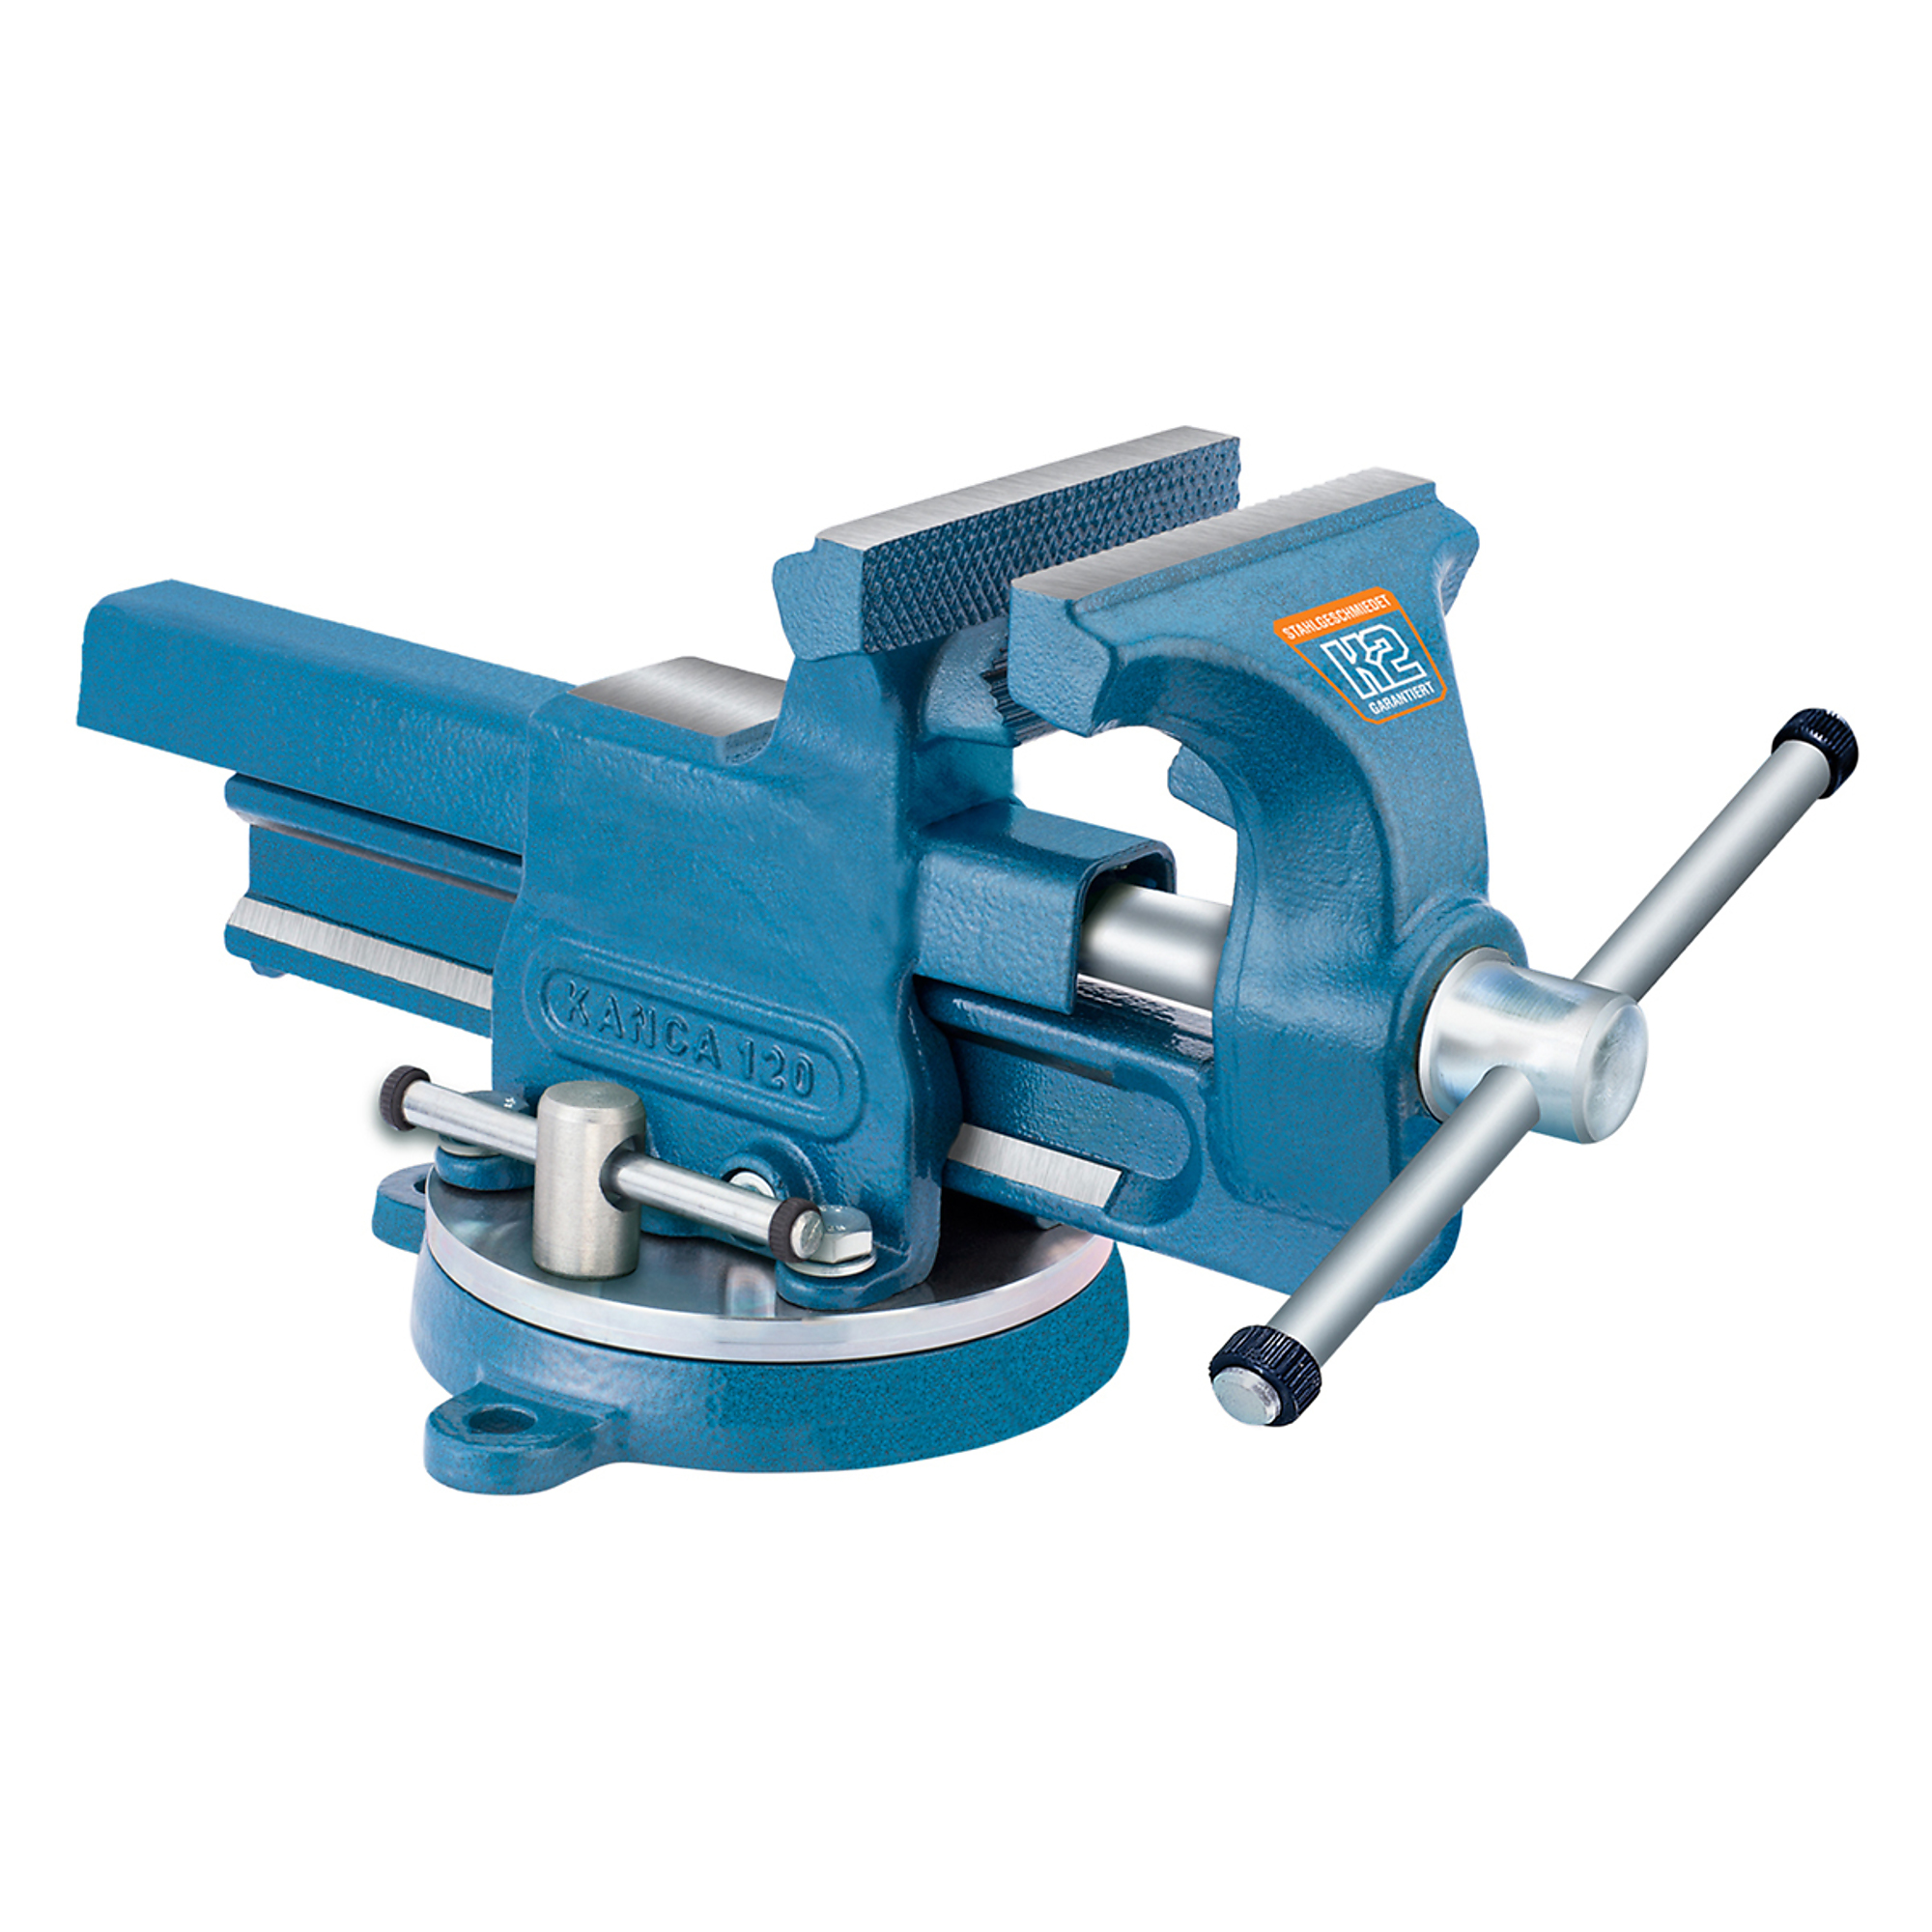 KANCA, K2 PLUMBERS VISE w. SWIVEL BASE 140 MM - 5.6Inch, Jaw Width 5.6 in, Jaw Capacity 7.5 in, Model K2 Pipe and Bench Vise